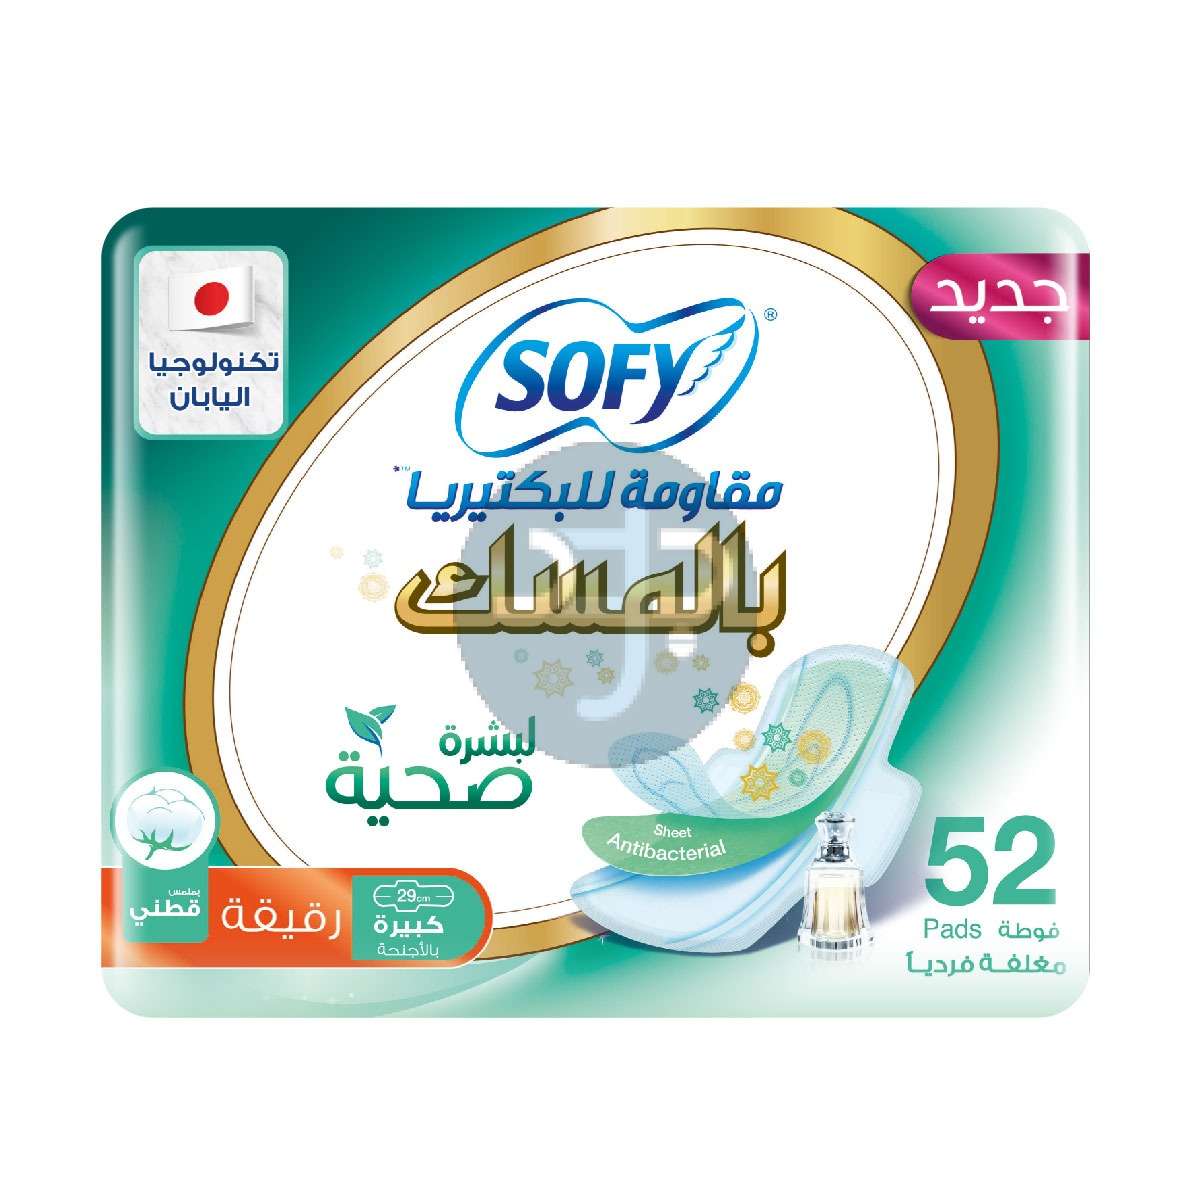 Product-SOFY Anti-Bacterial with Musk Sanitary Pads with Wings, Slim, Large 29 cm, Pack of 52 Pads